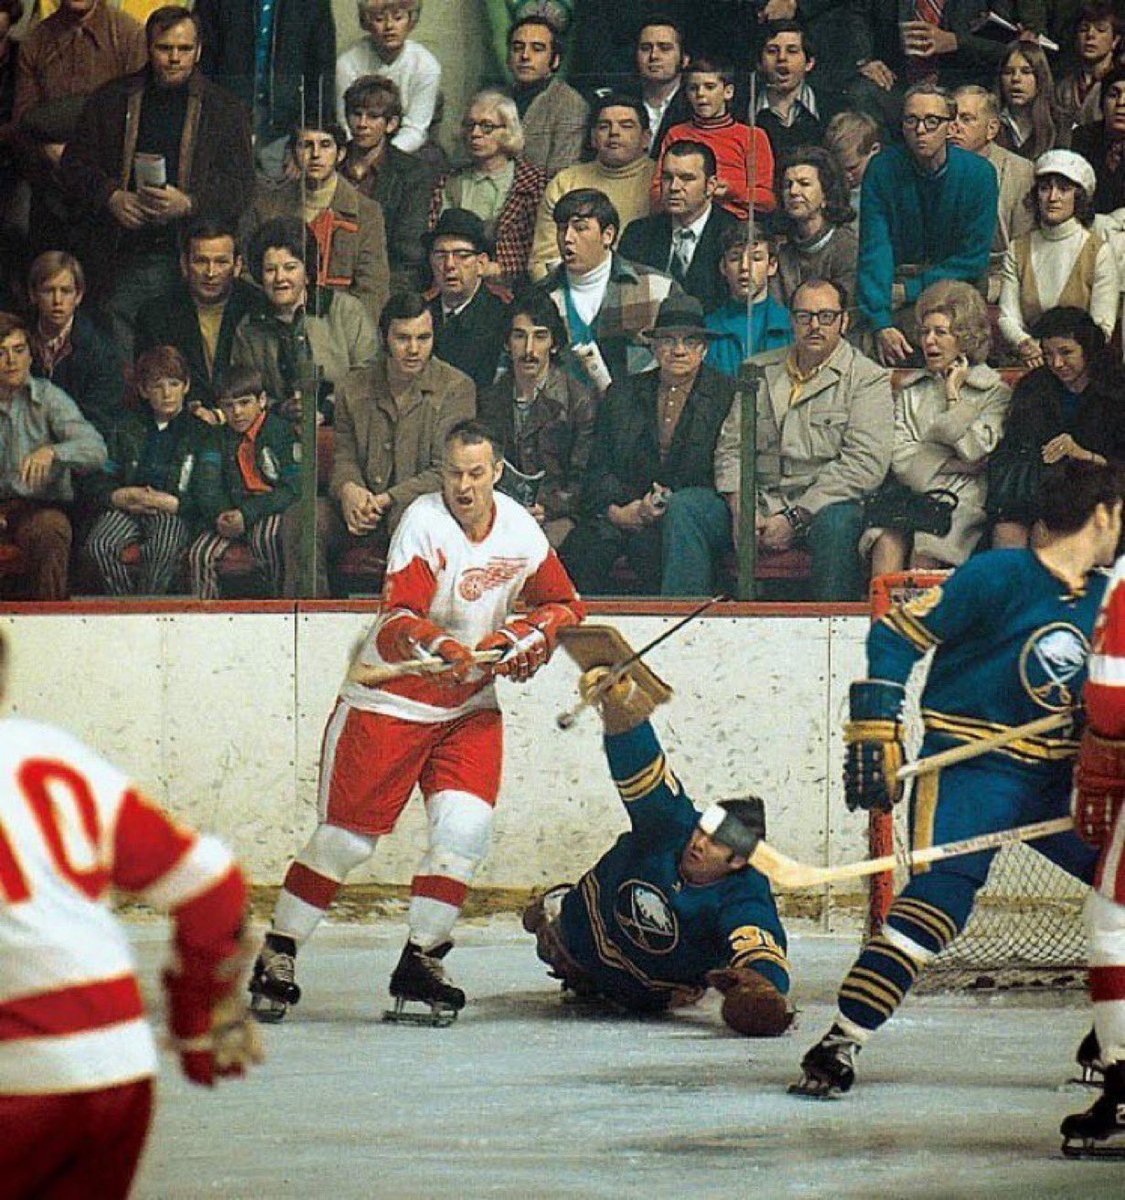 They don’t make hockey players, hockey fans, or hockey photographers like they used to.